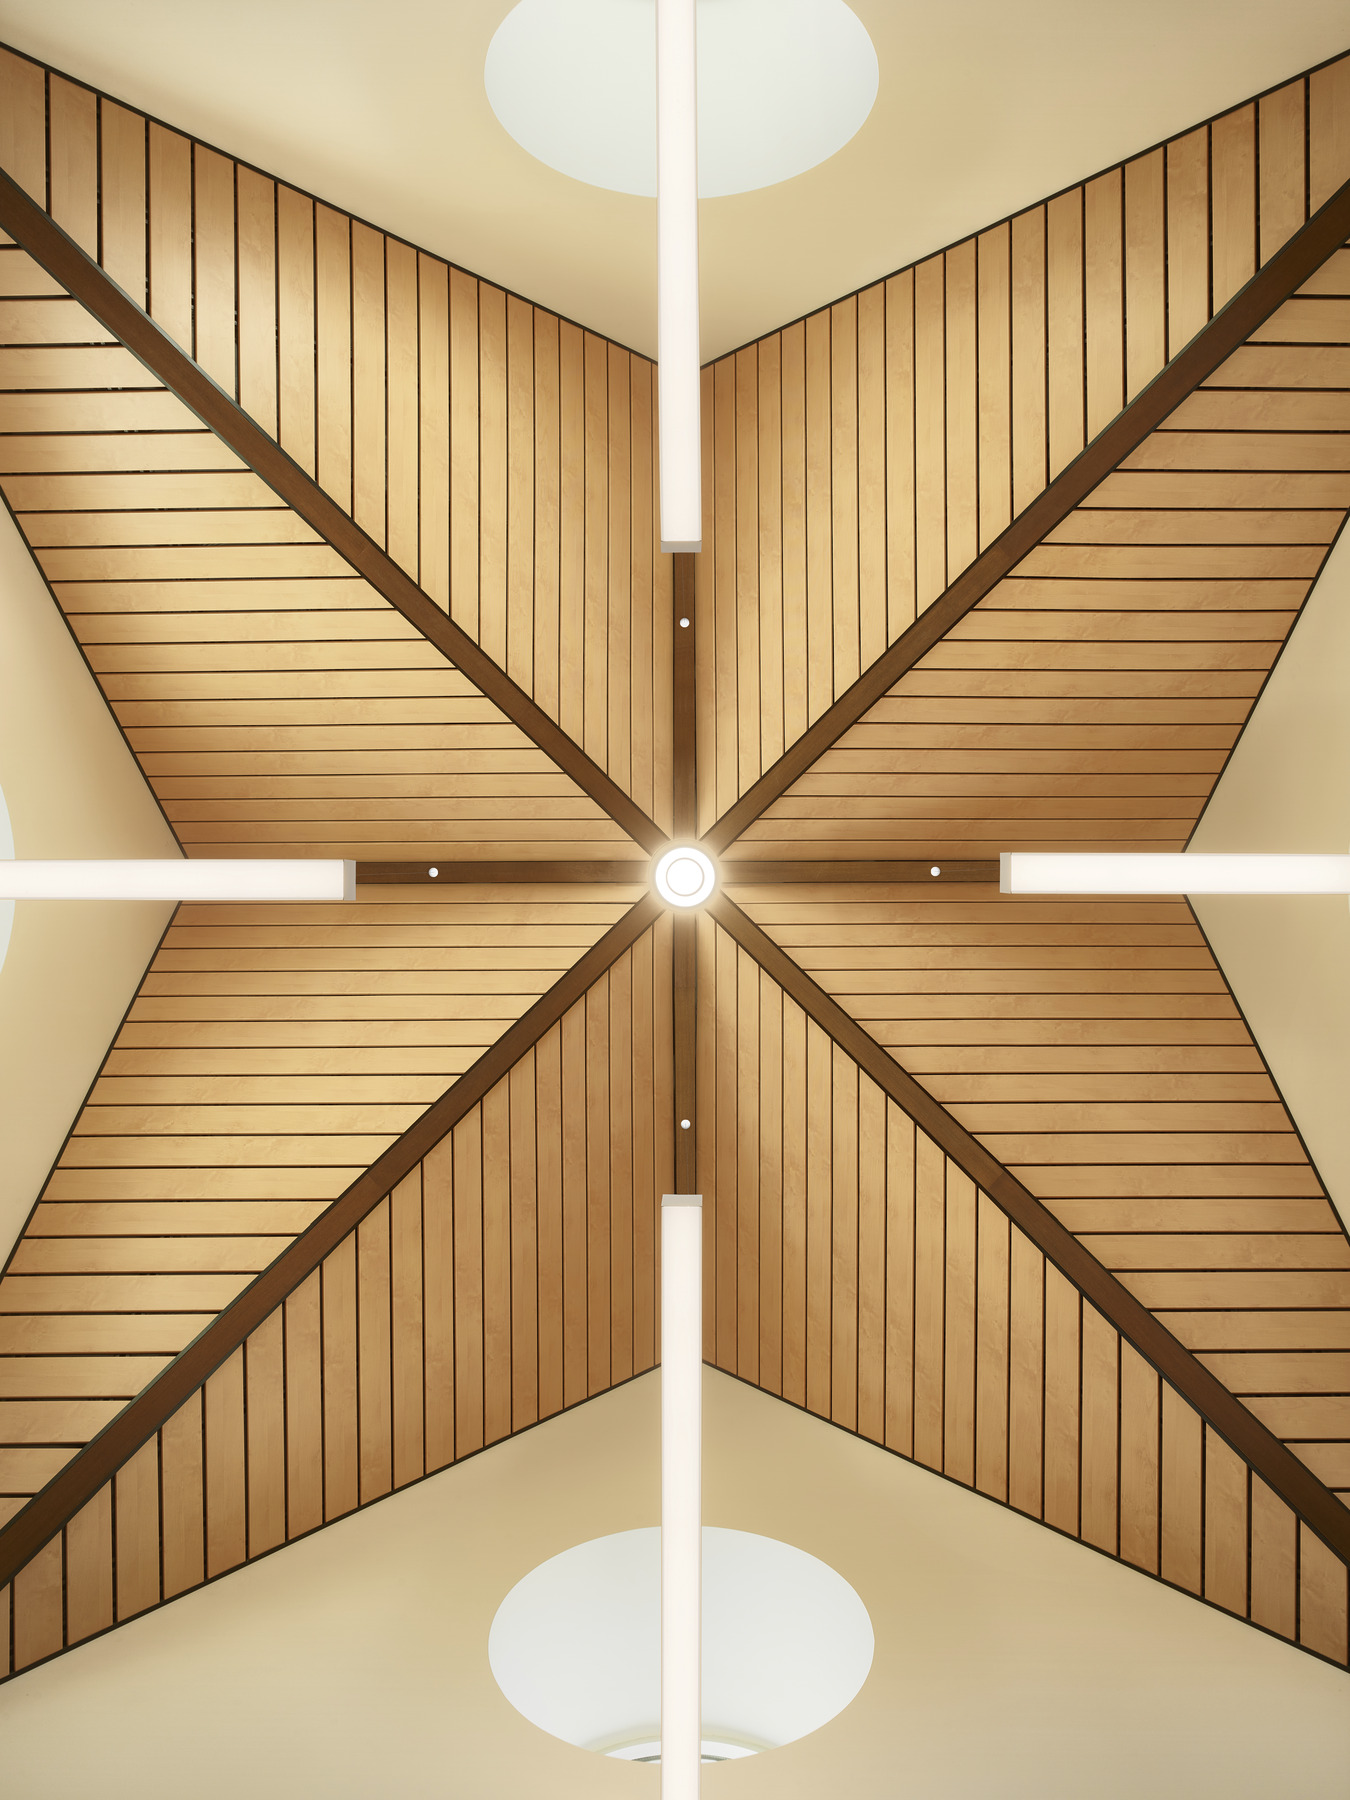 Wood ceiling detail at the Madonna Rehabilitation Center closeup. 8 triangular segments in pairs come to center circle light